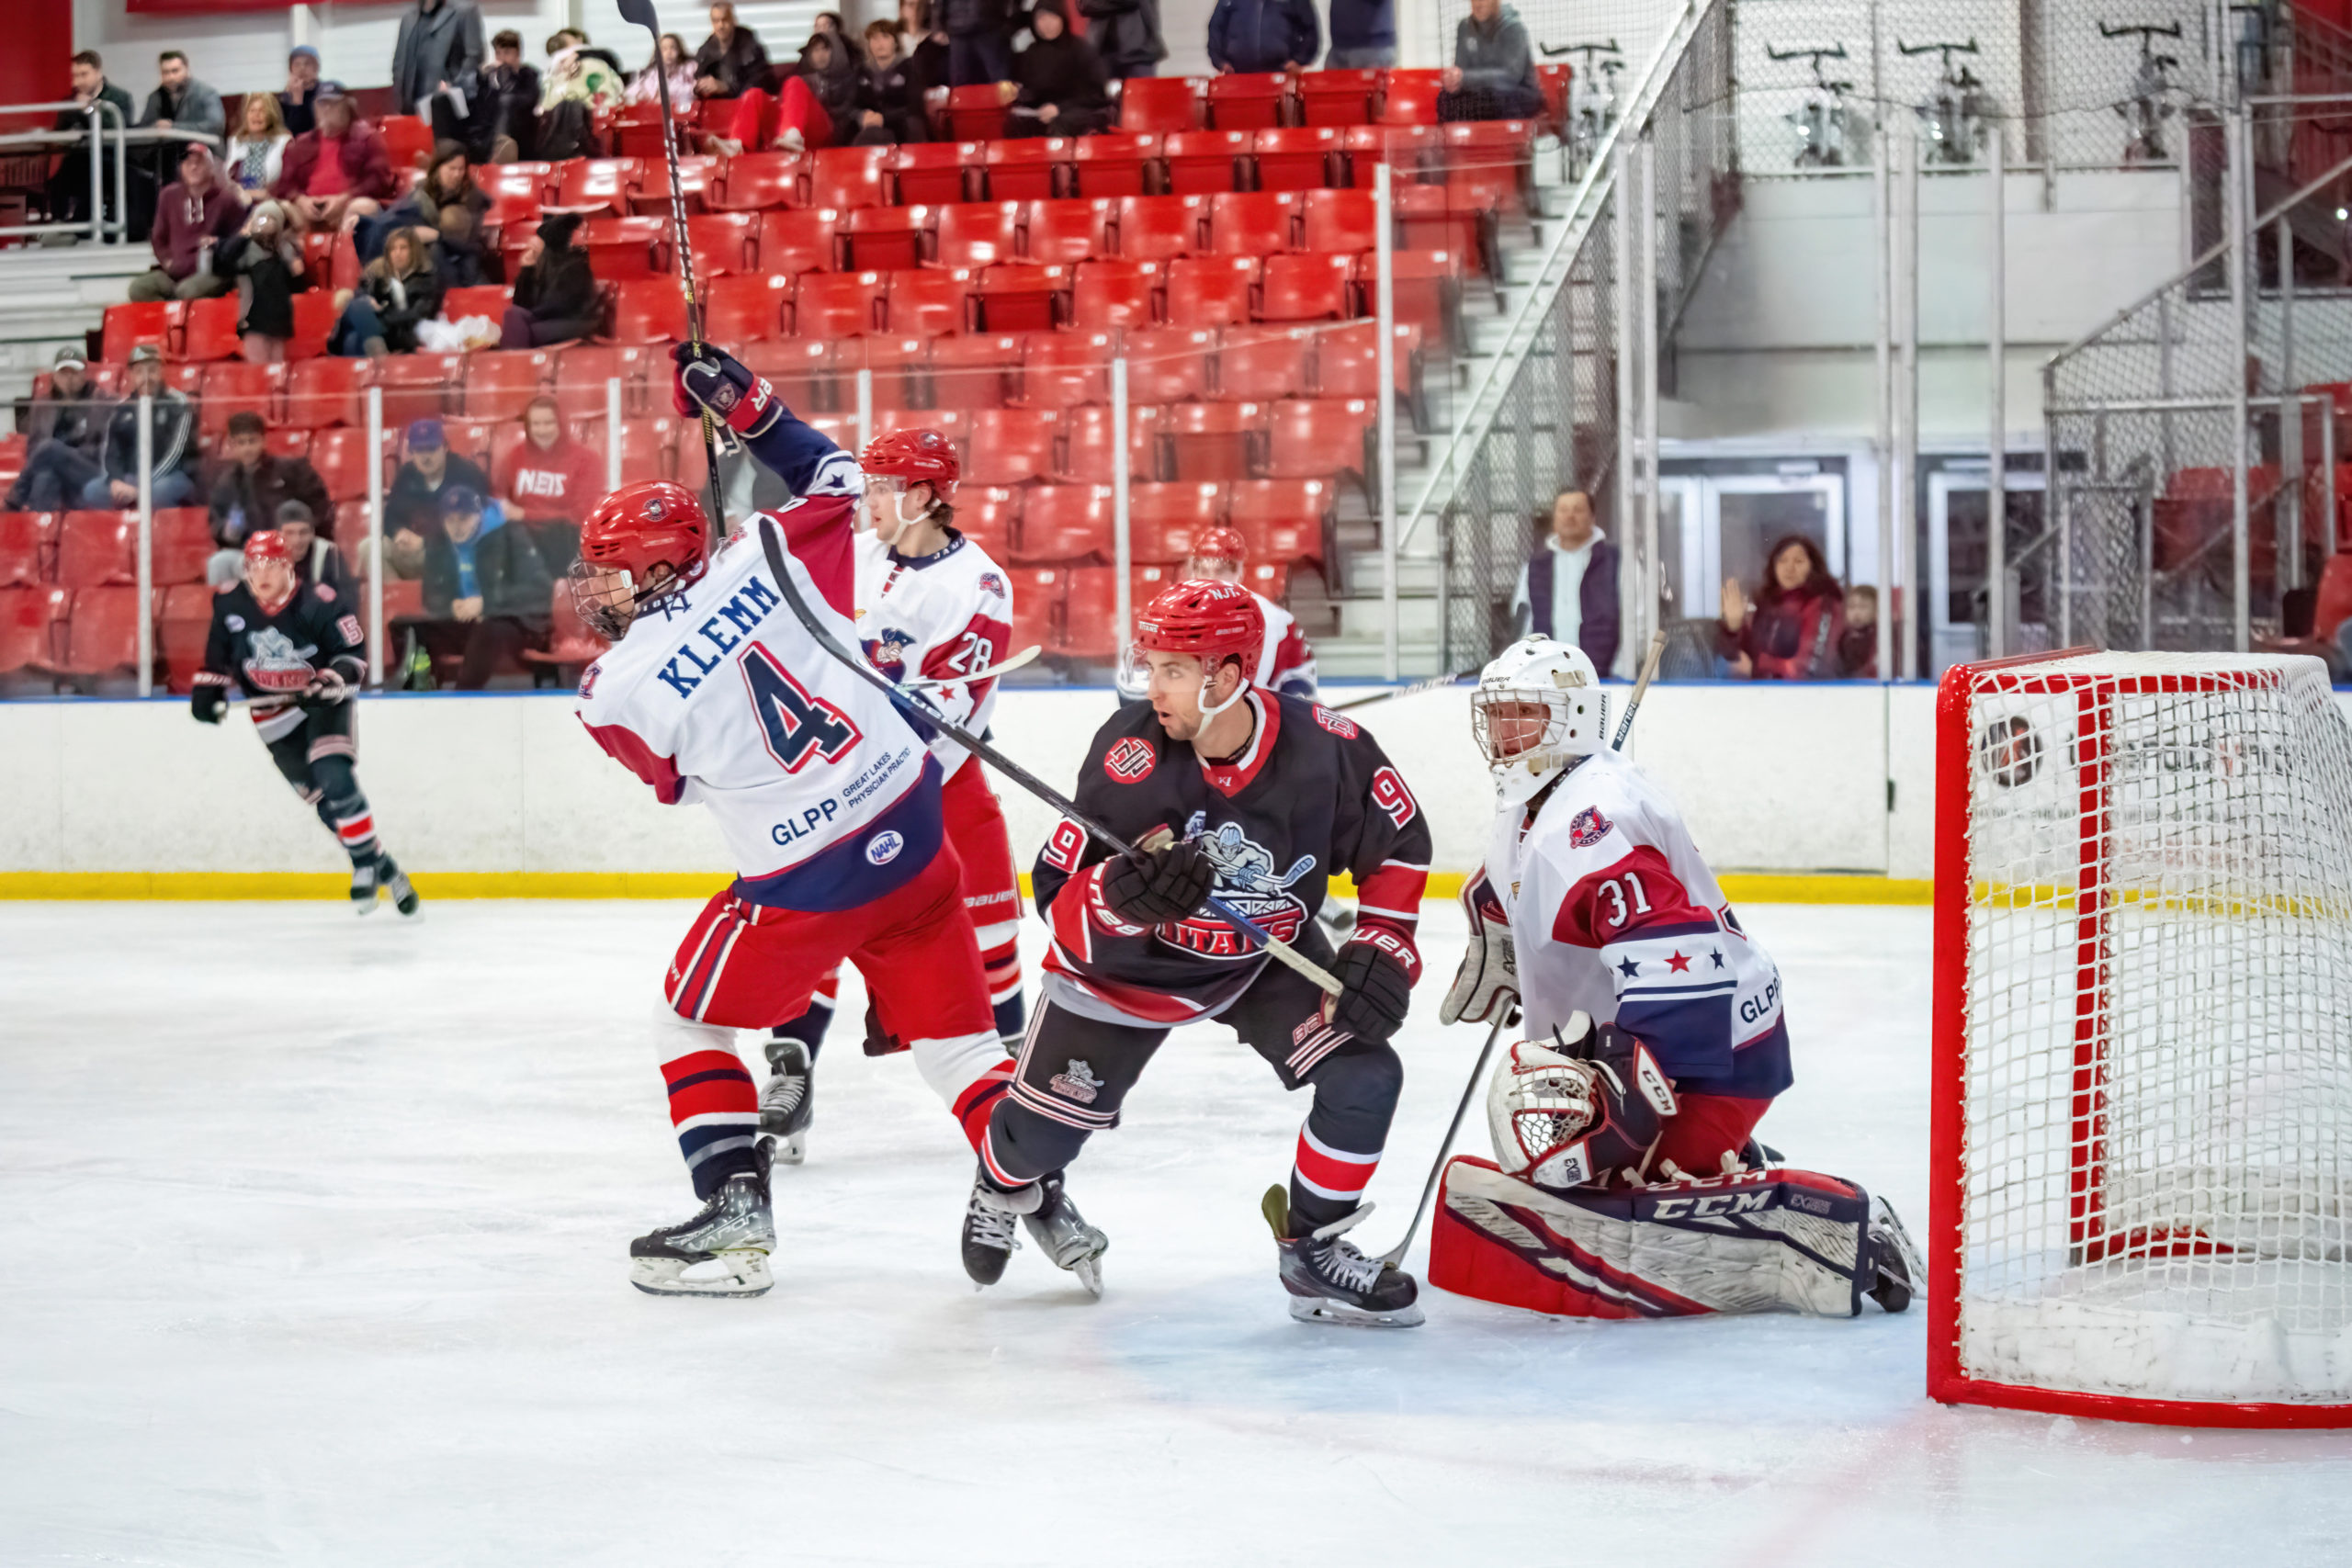 Weekend Preview: 3/4 & 3/5 – Titans host Rebels for two game series